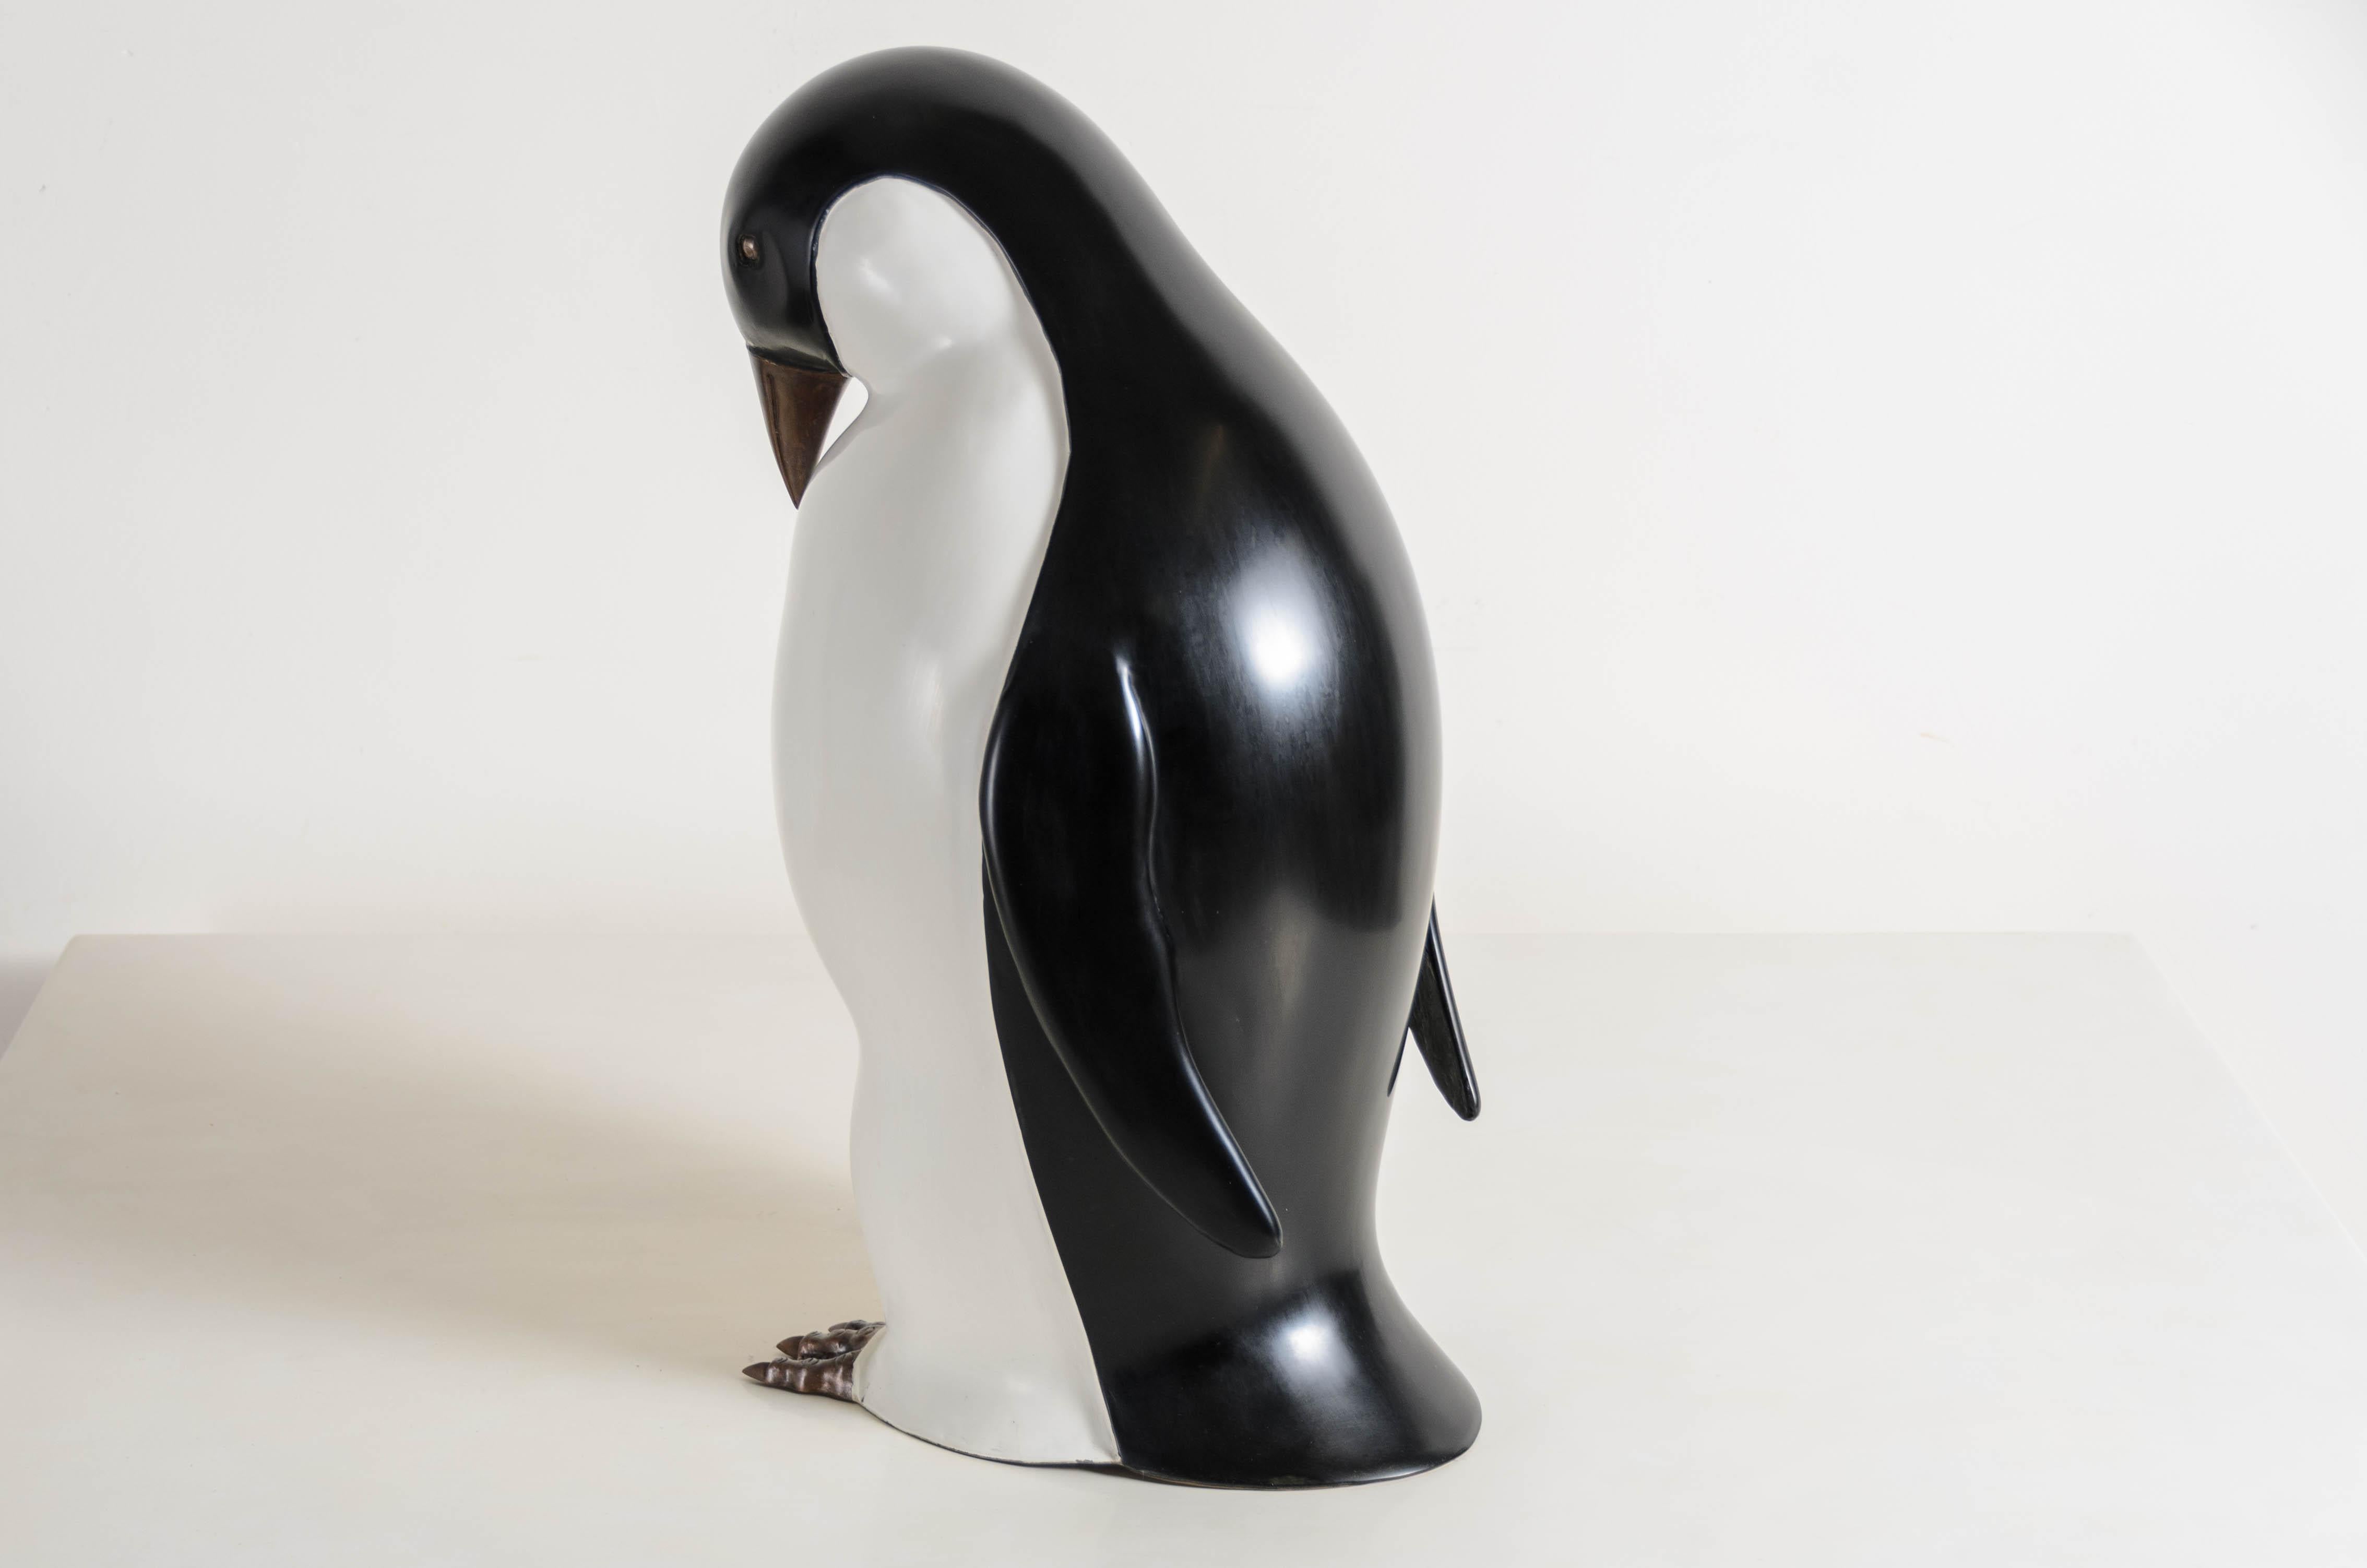 Contemporary Black & Cream Lacquer Penguin w/ Head Down Sculpture by Robert Kuo For Sale 1